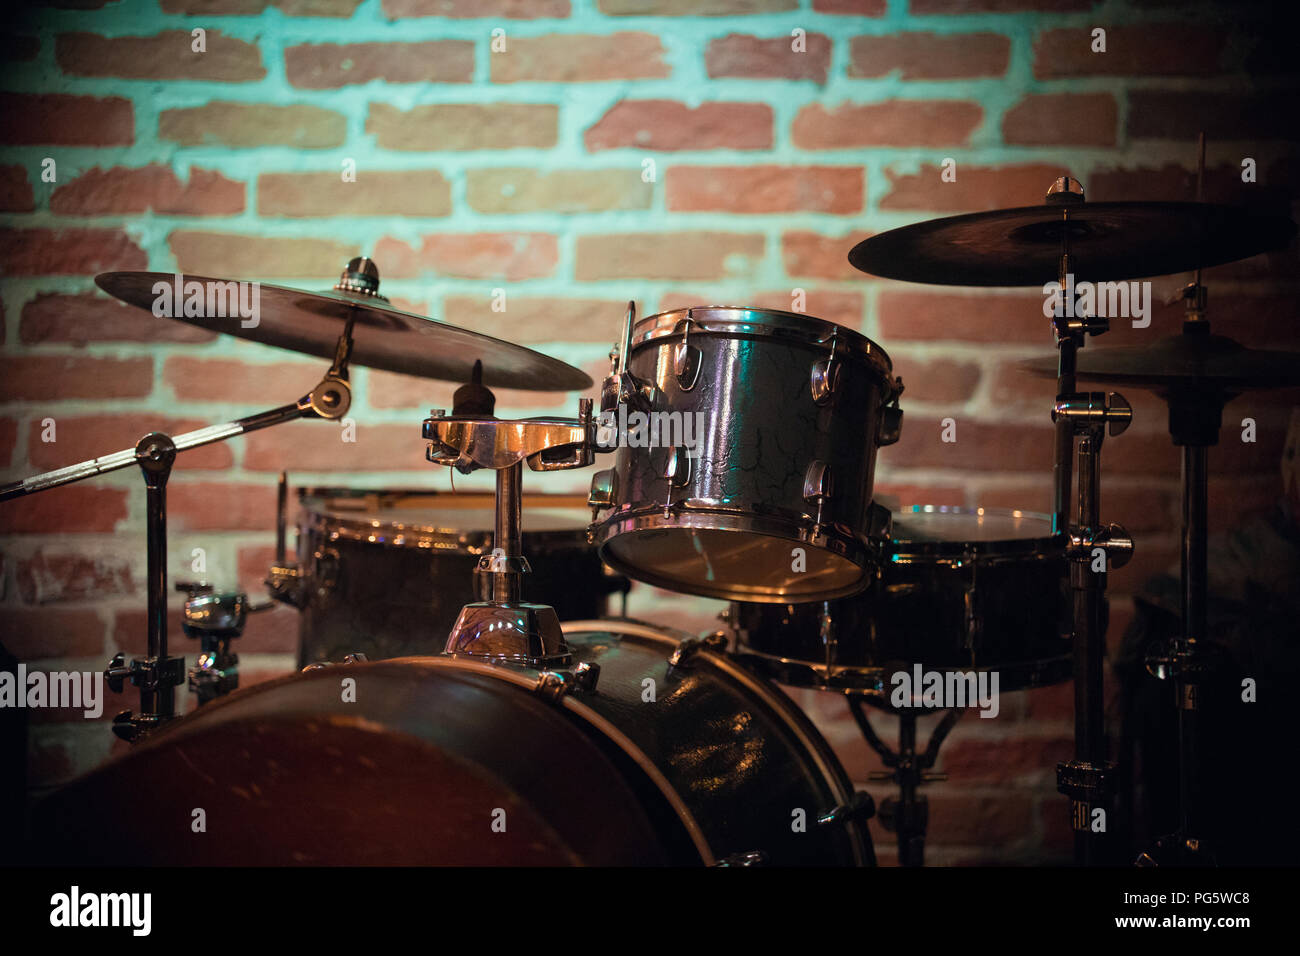 A Beautiful Drum Stands Against A Brick Wall In A Jazz Bar Stock Photo Alamy